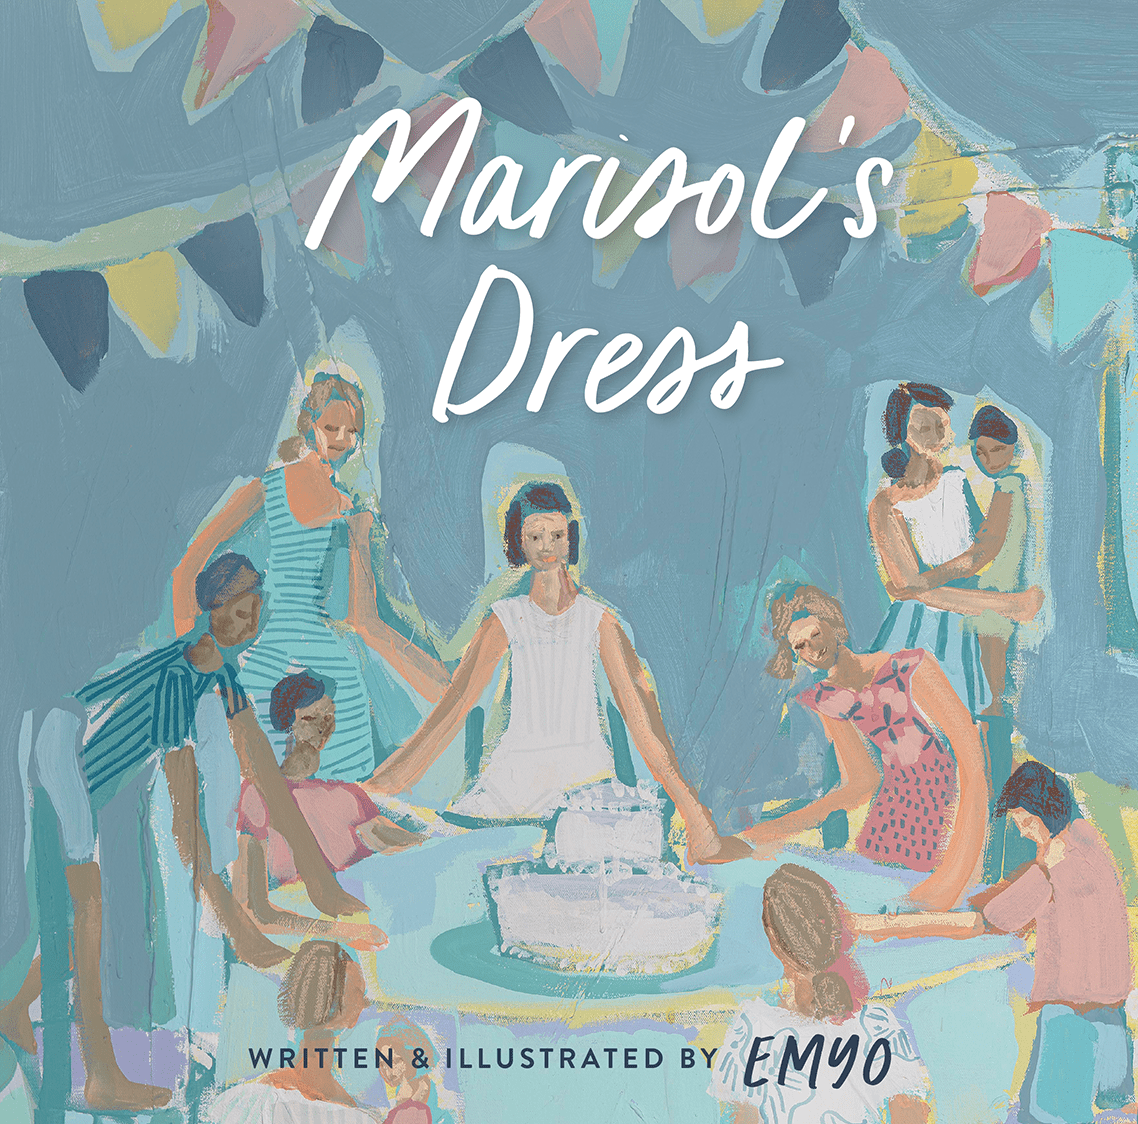 Designed image of people and Marisol's Dress